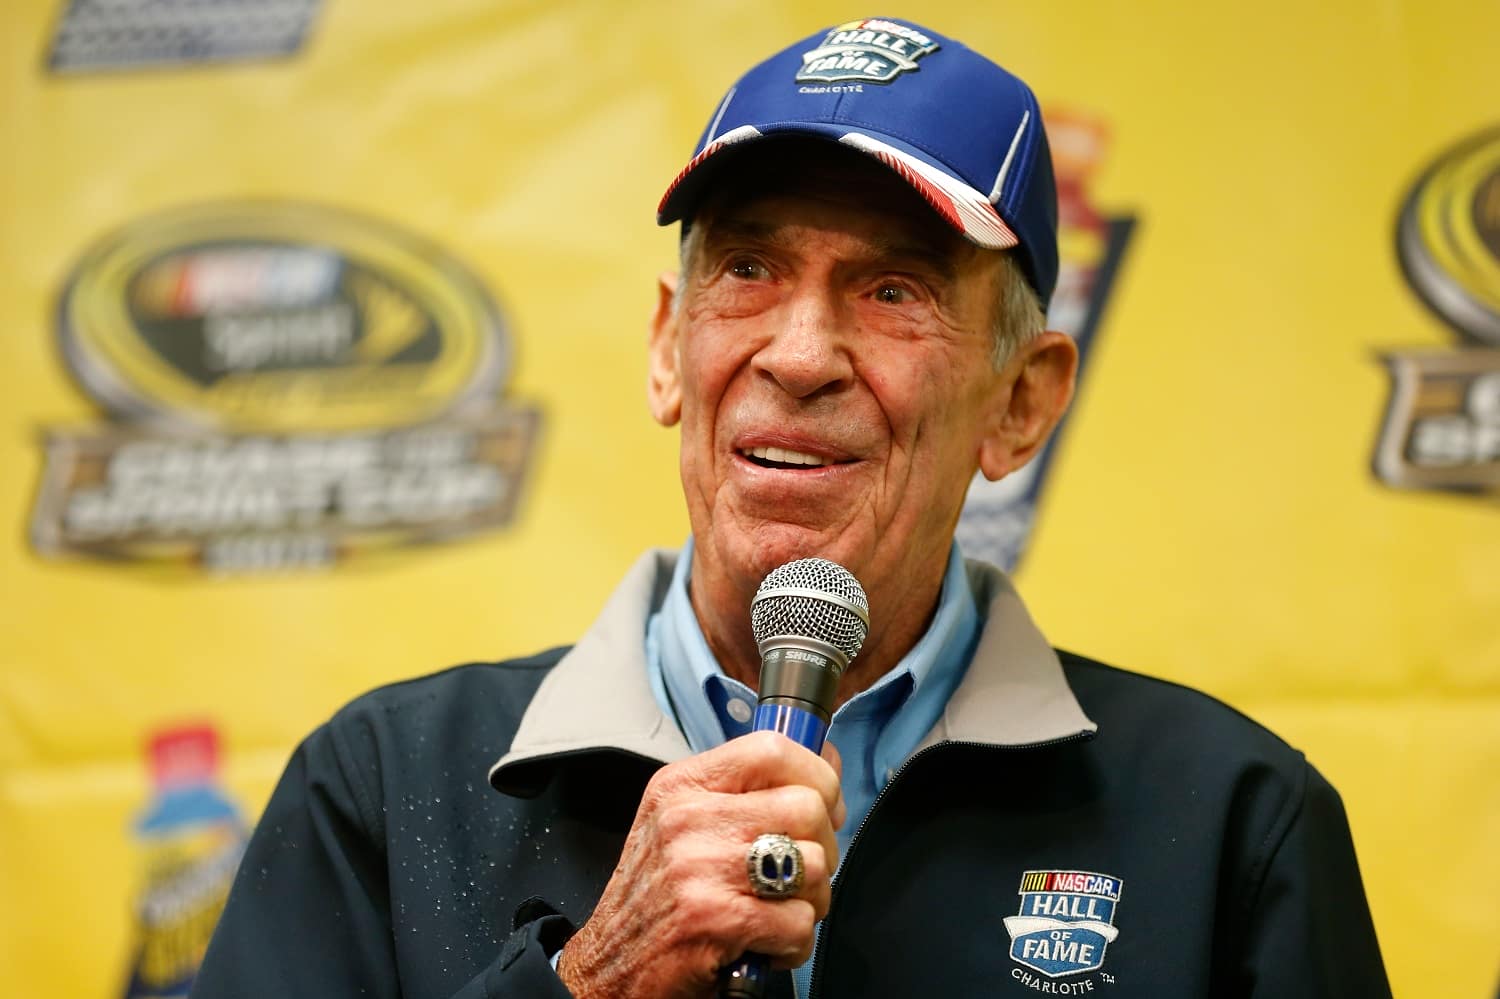 NASCAR Hall of Famer Ned Jarrett speaks with the media prior to the NASCAR Goody's Headache Relief Shot 500 at Martinsville Speedway on Nov. 1, 2015, in Martinsville, Virginia.